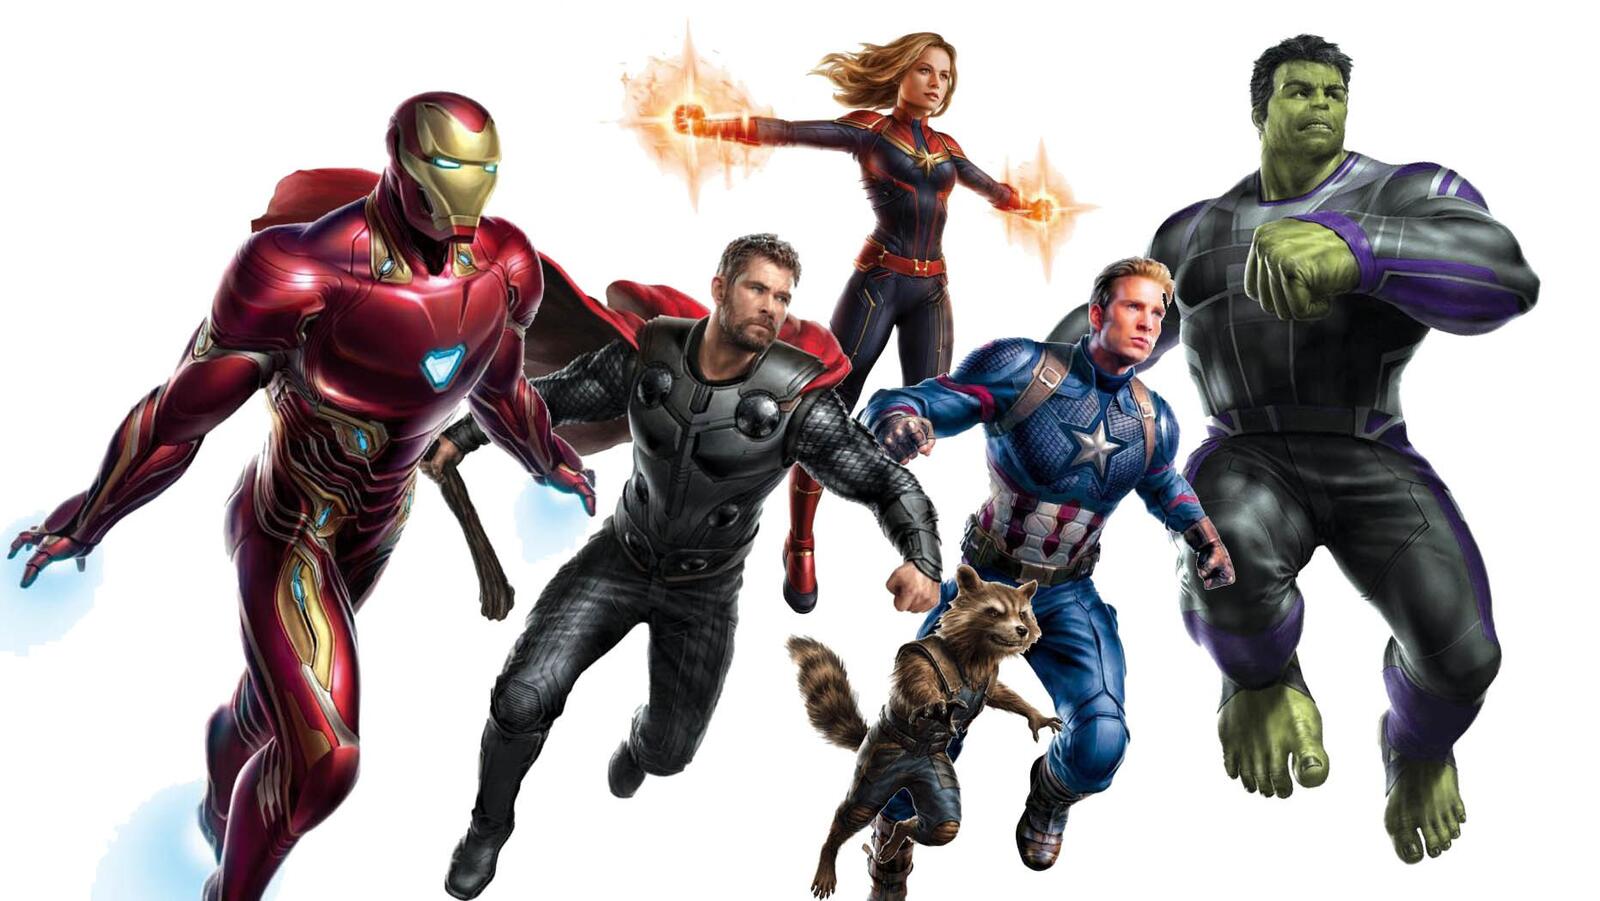 Free photo Heroes from the Avengers movie